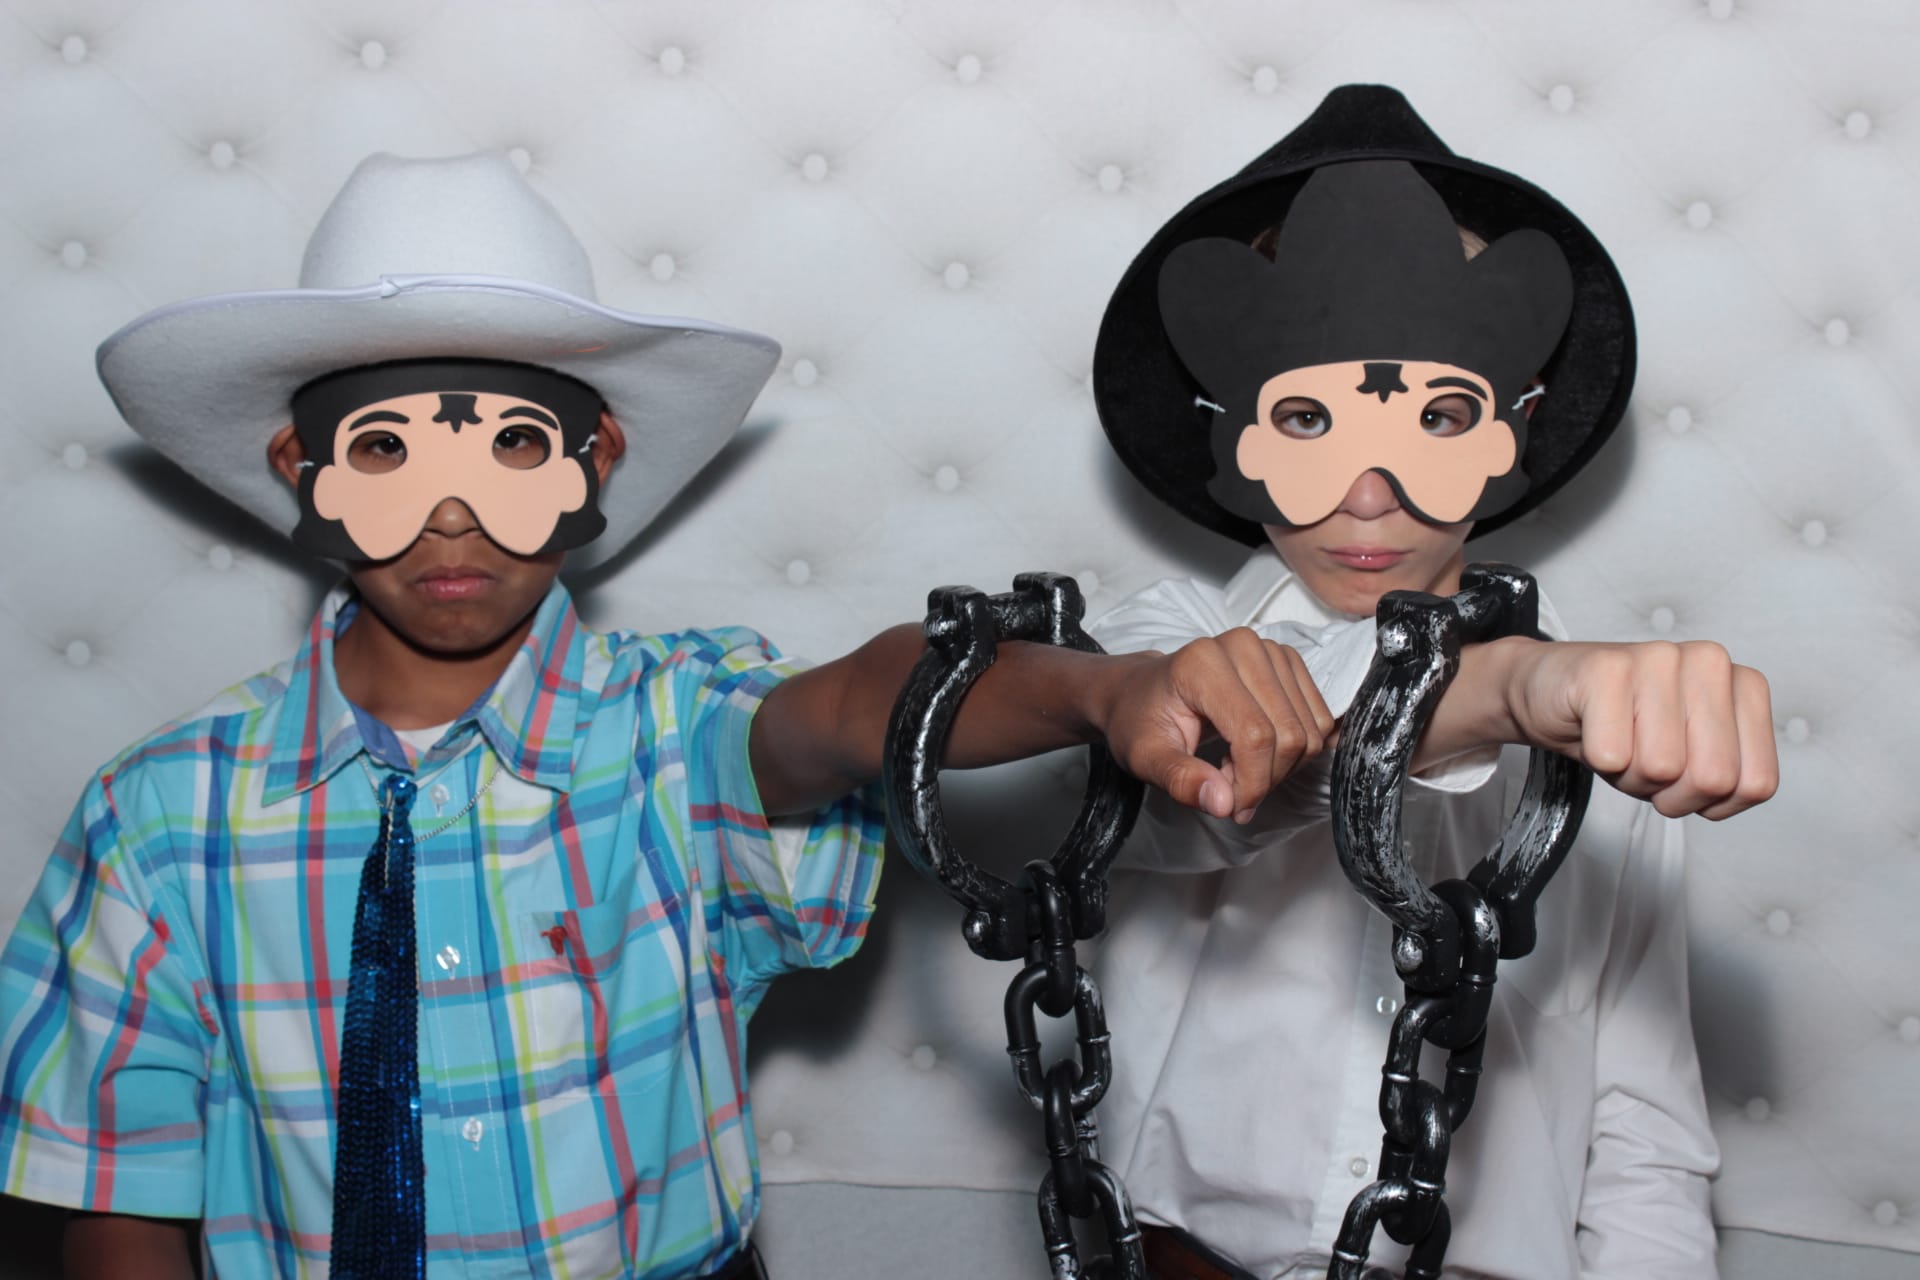 Photo-Booth-Rental-Austin-Kyle-Texas Old Town-Wedding-Reception-Props-Fun-No.1-Affordable-Photography